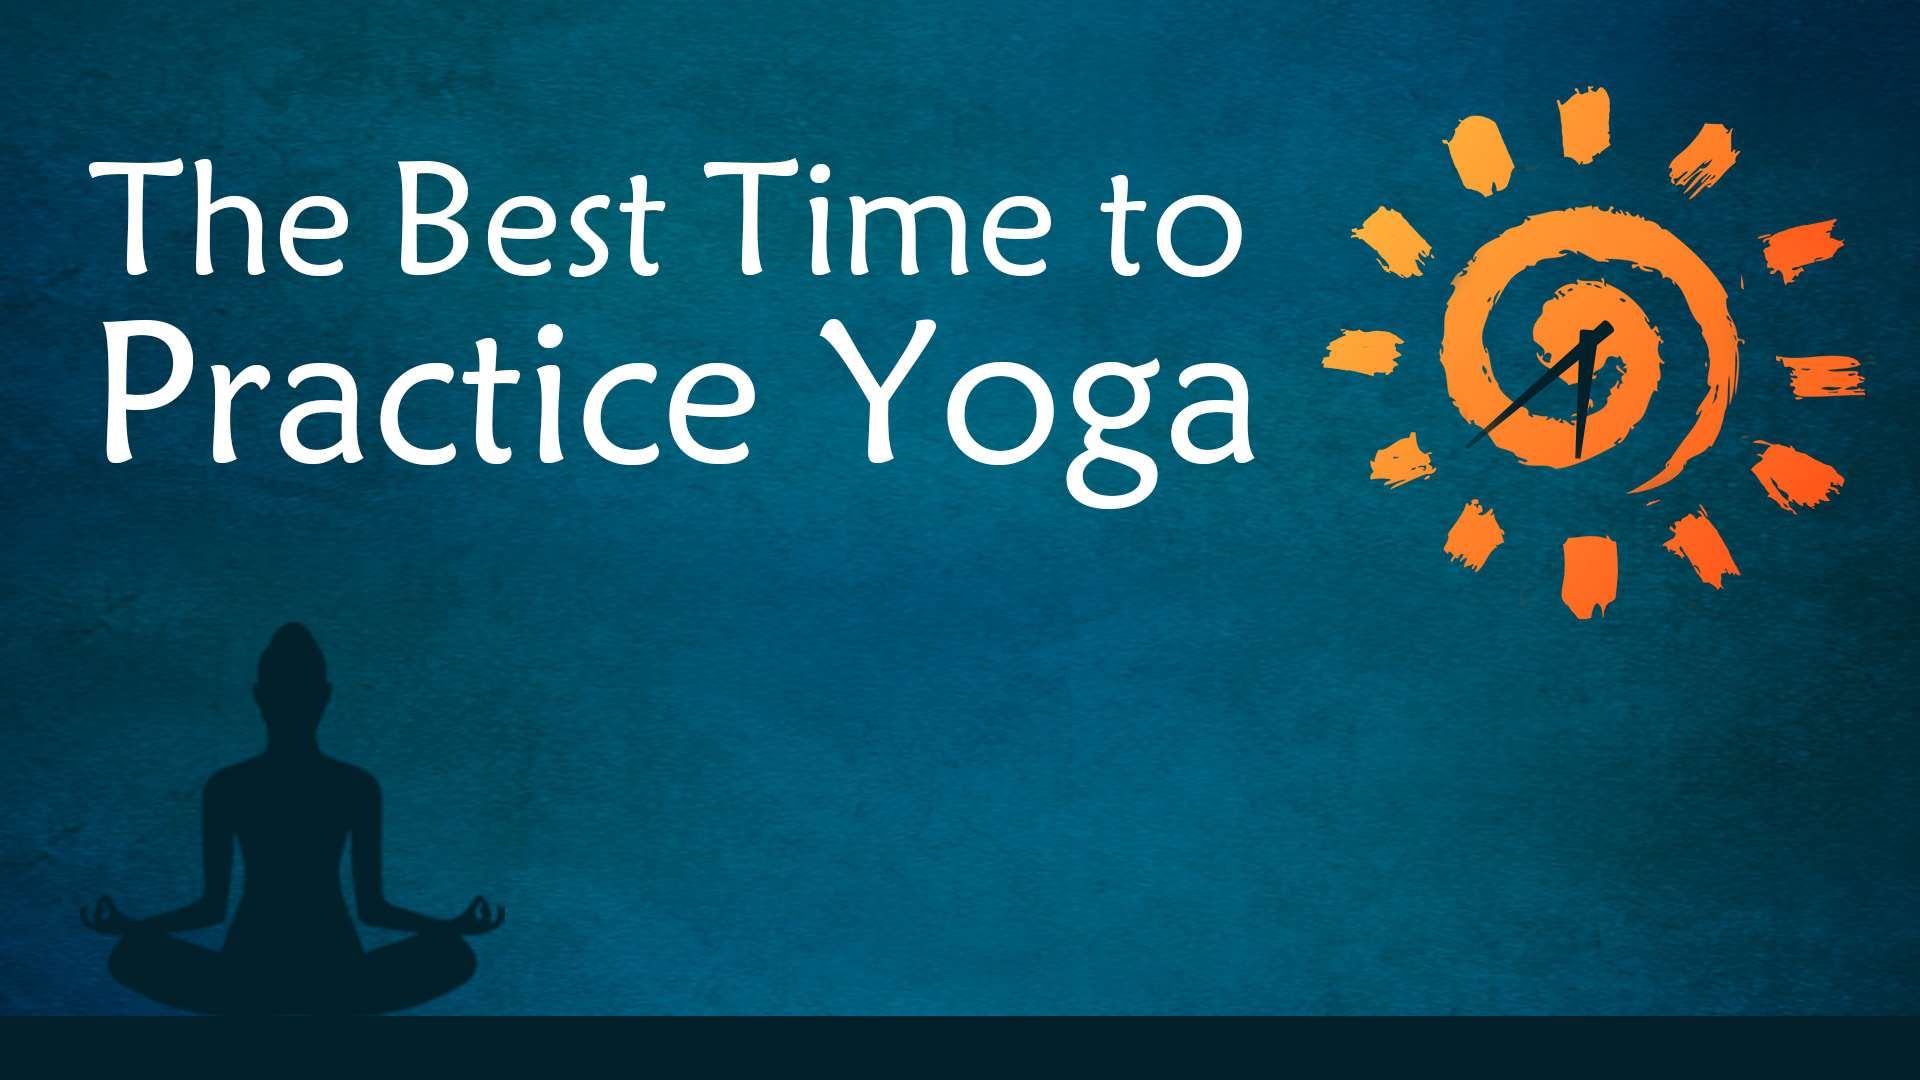 What is the Best Time to Practice Yoga?